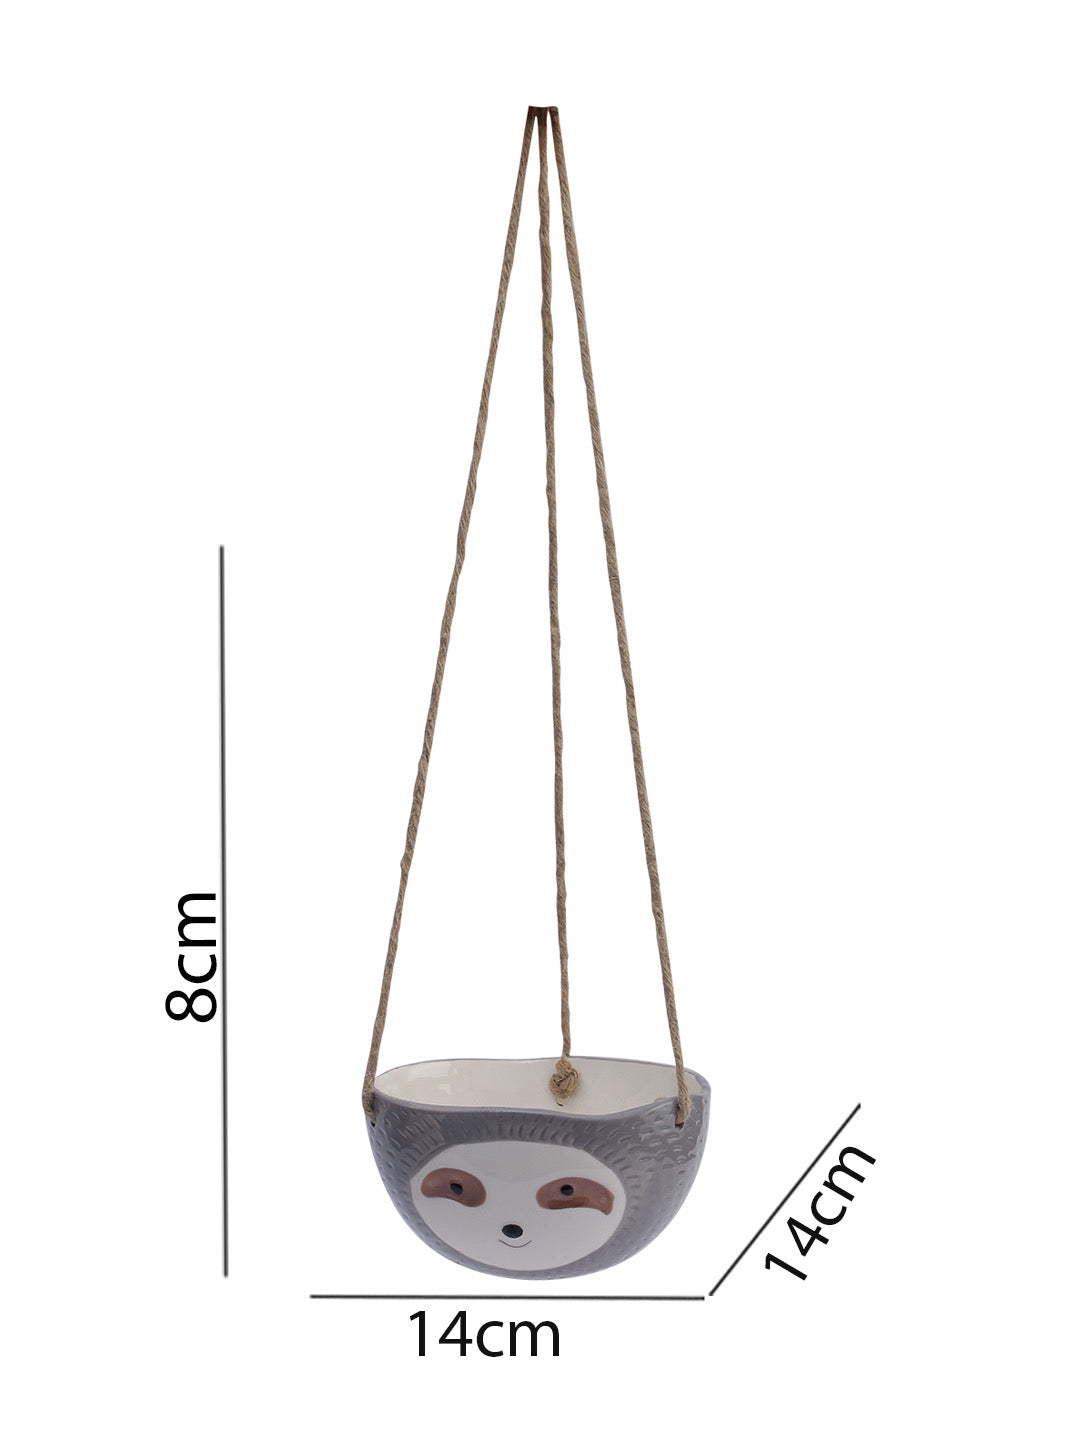 Green Baby face Hanging Ceramic Planter - Default Title (CH22259GR_NEW)